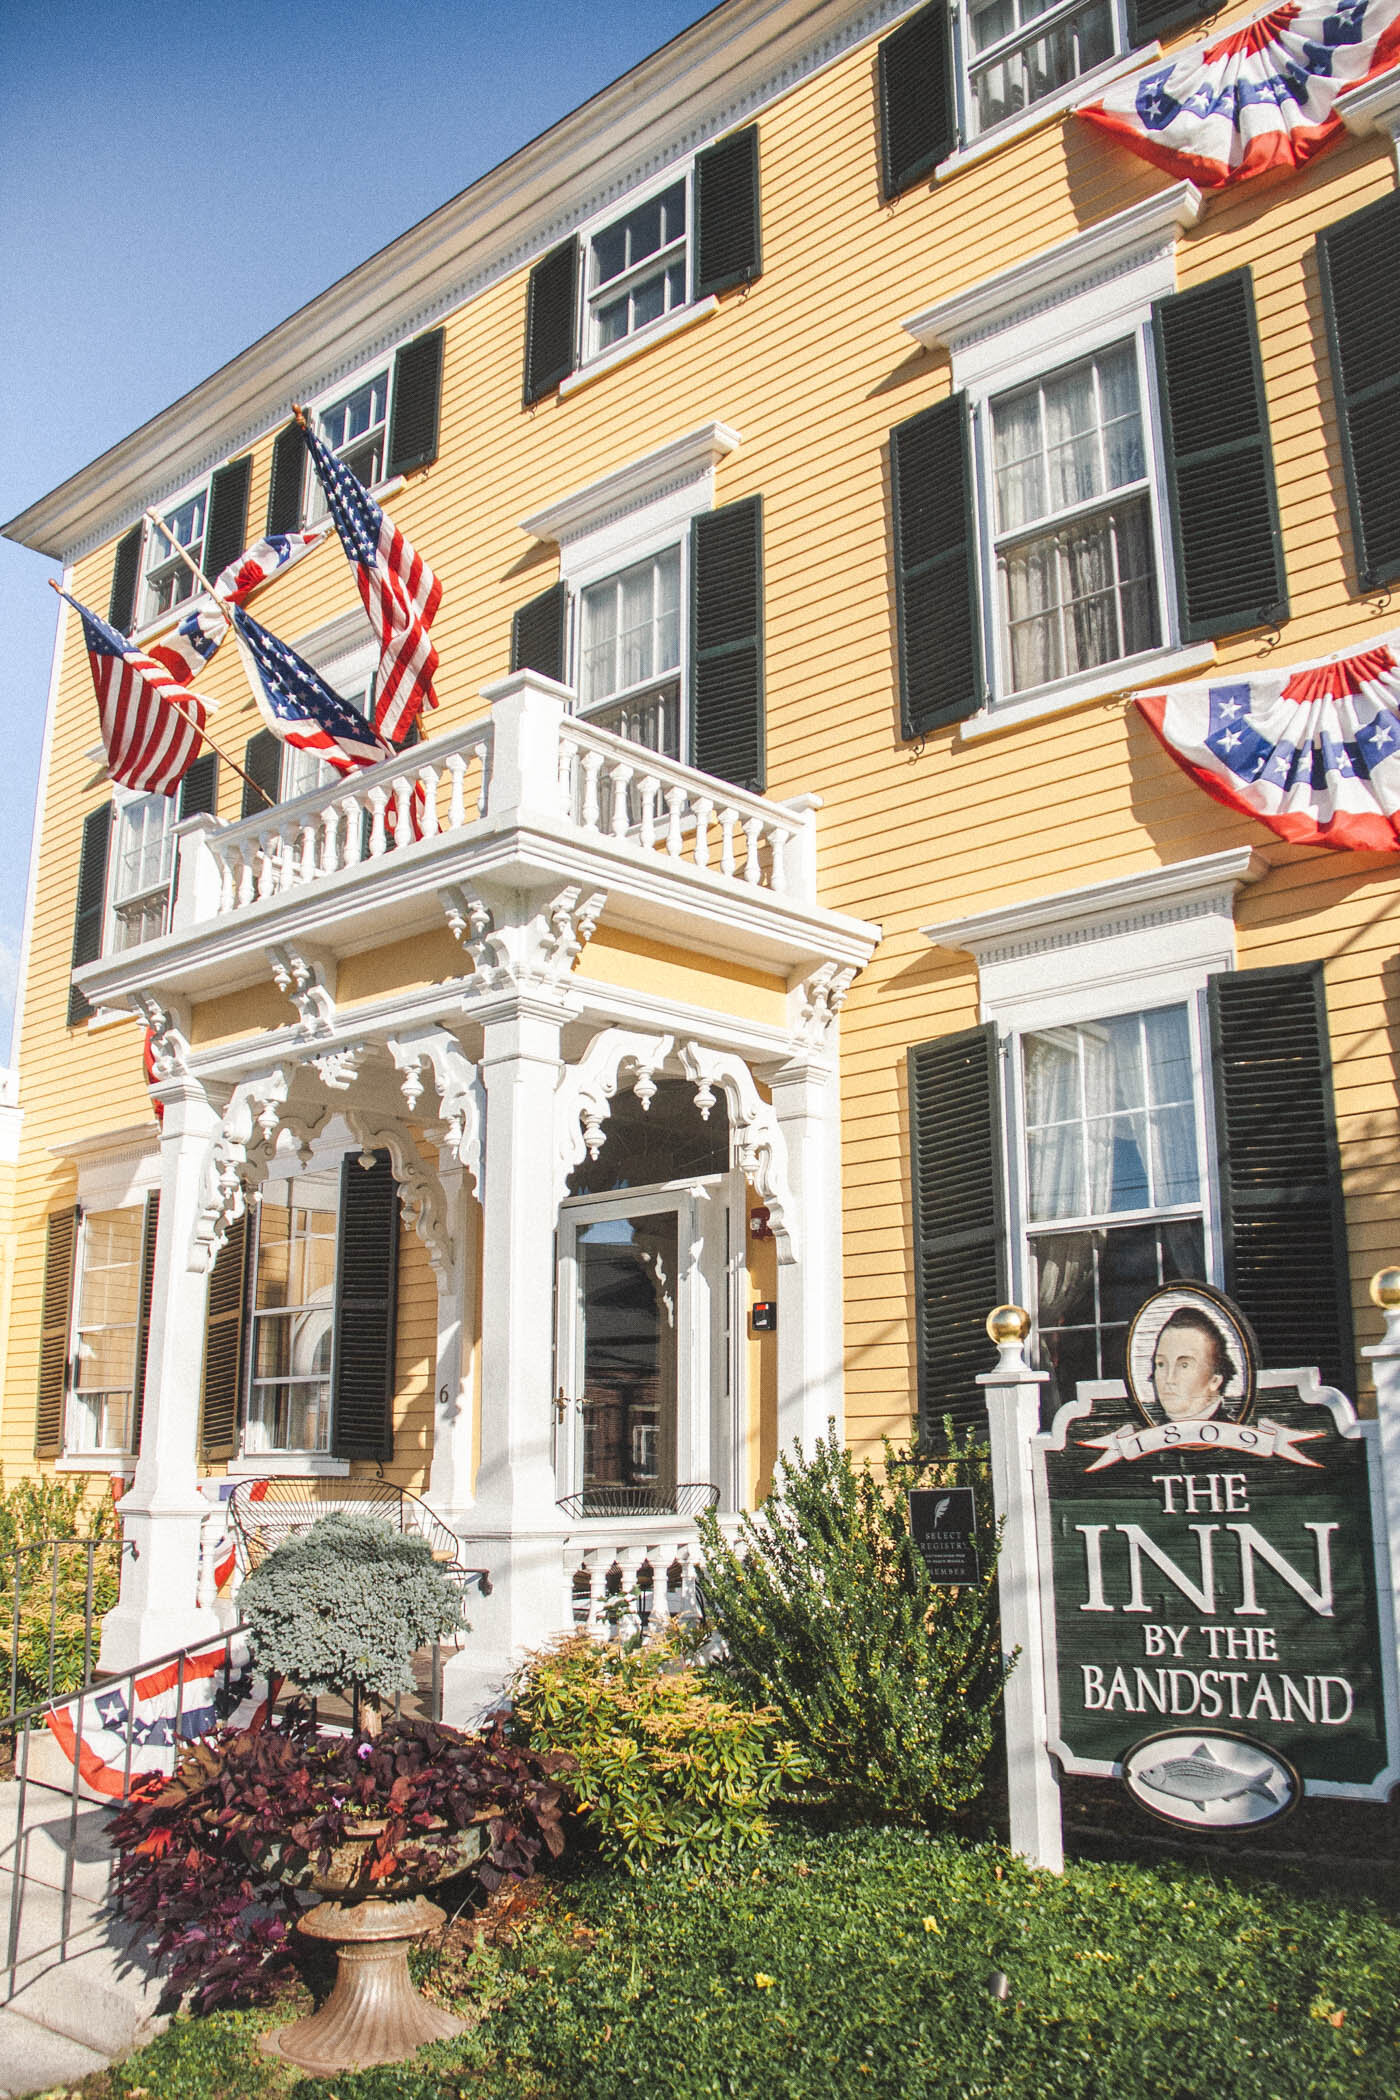 The Inn by the Bandstand, Exeter, NH